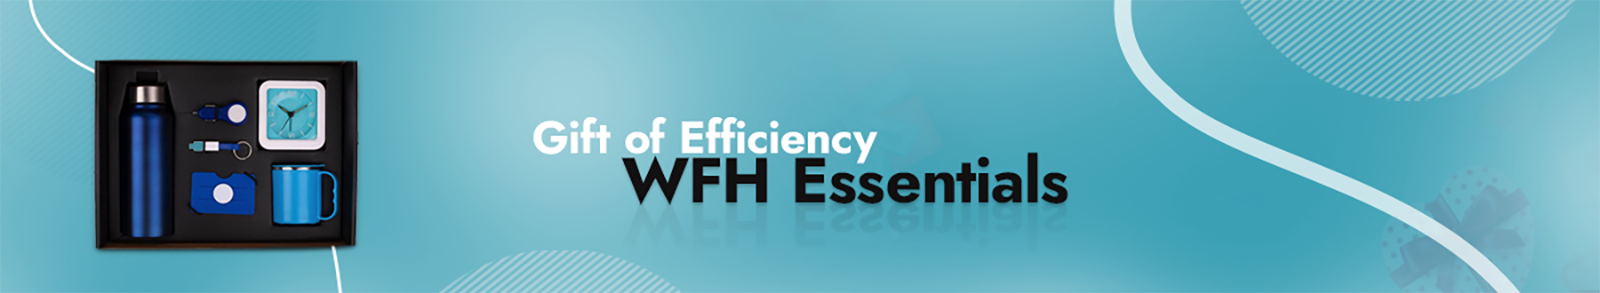 Gift of Efficiency WFH Essentials